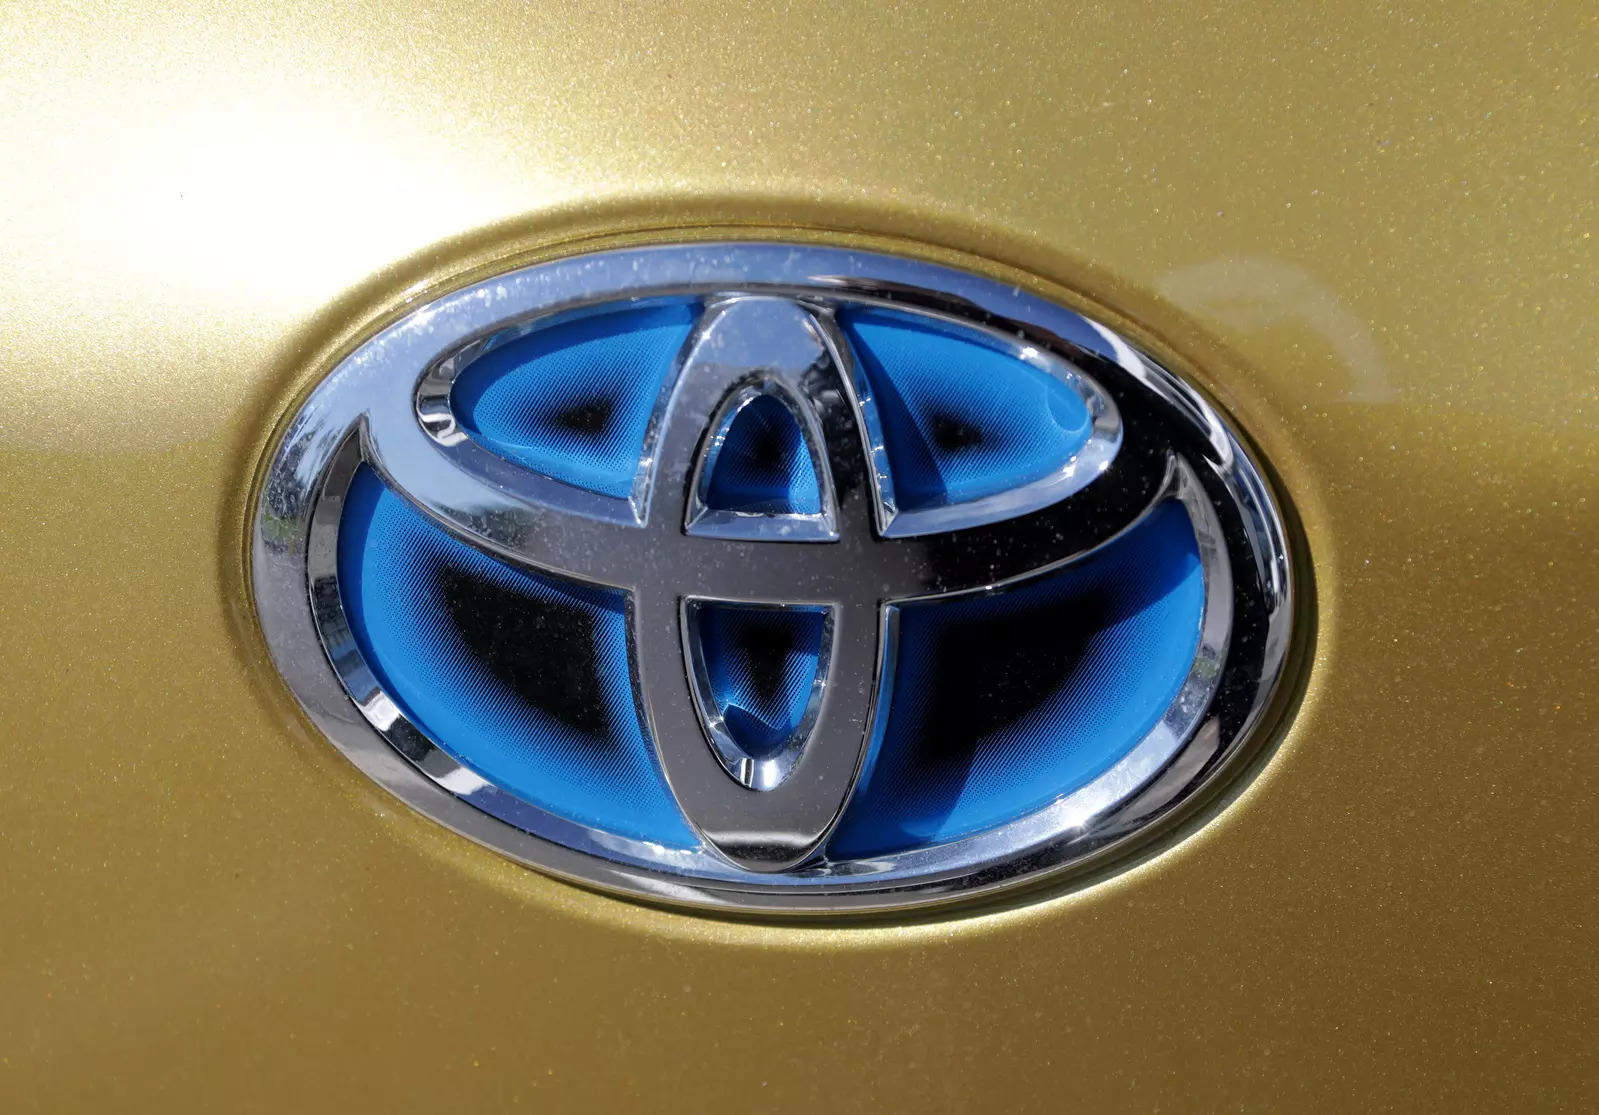 The toyota factories affected produce models varying from Lexus cars to Harrier SUVs.